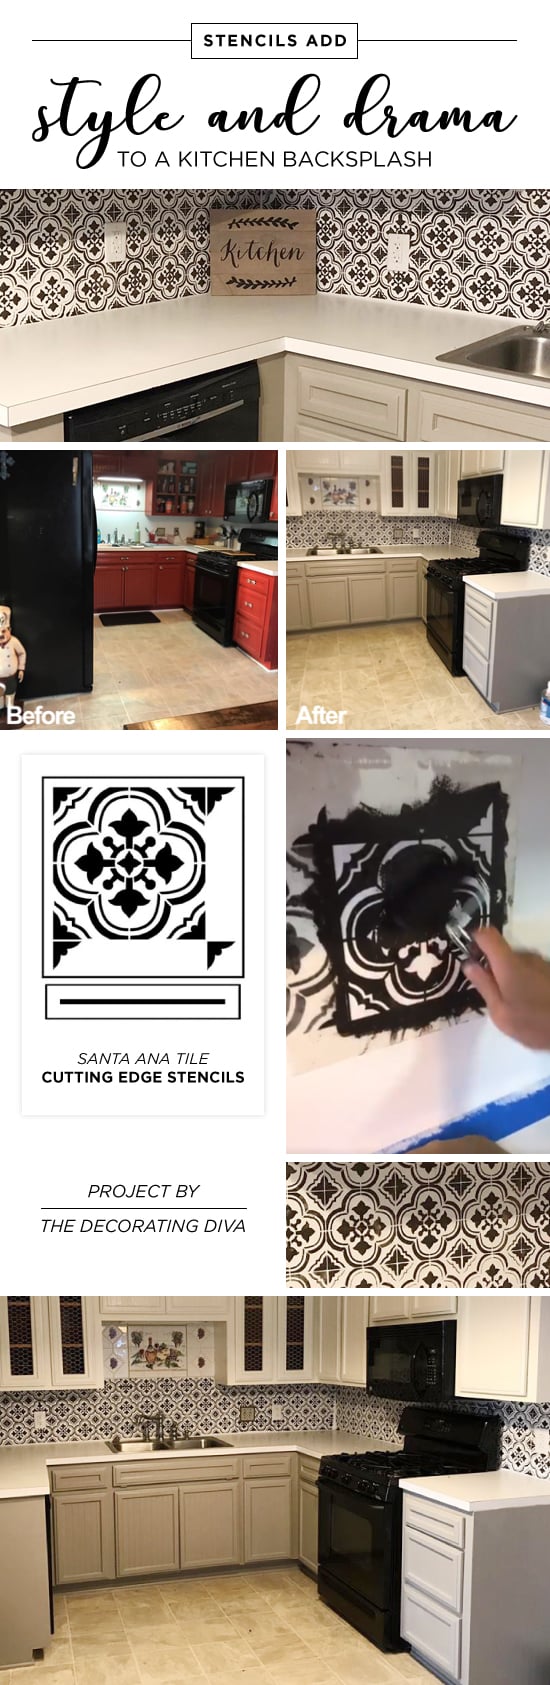 Cutting Edge Stencils shares a kitchen makeover with a faux tile backsplash using the Santa Ana Tile pattern. http://www.cuttingedgestencils.com/santa-ana-tile-stencil-spanish-tiles-cement-tile-patterns.html